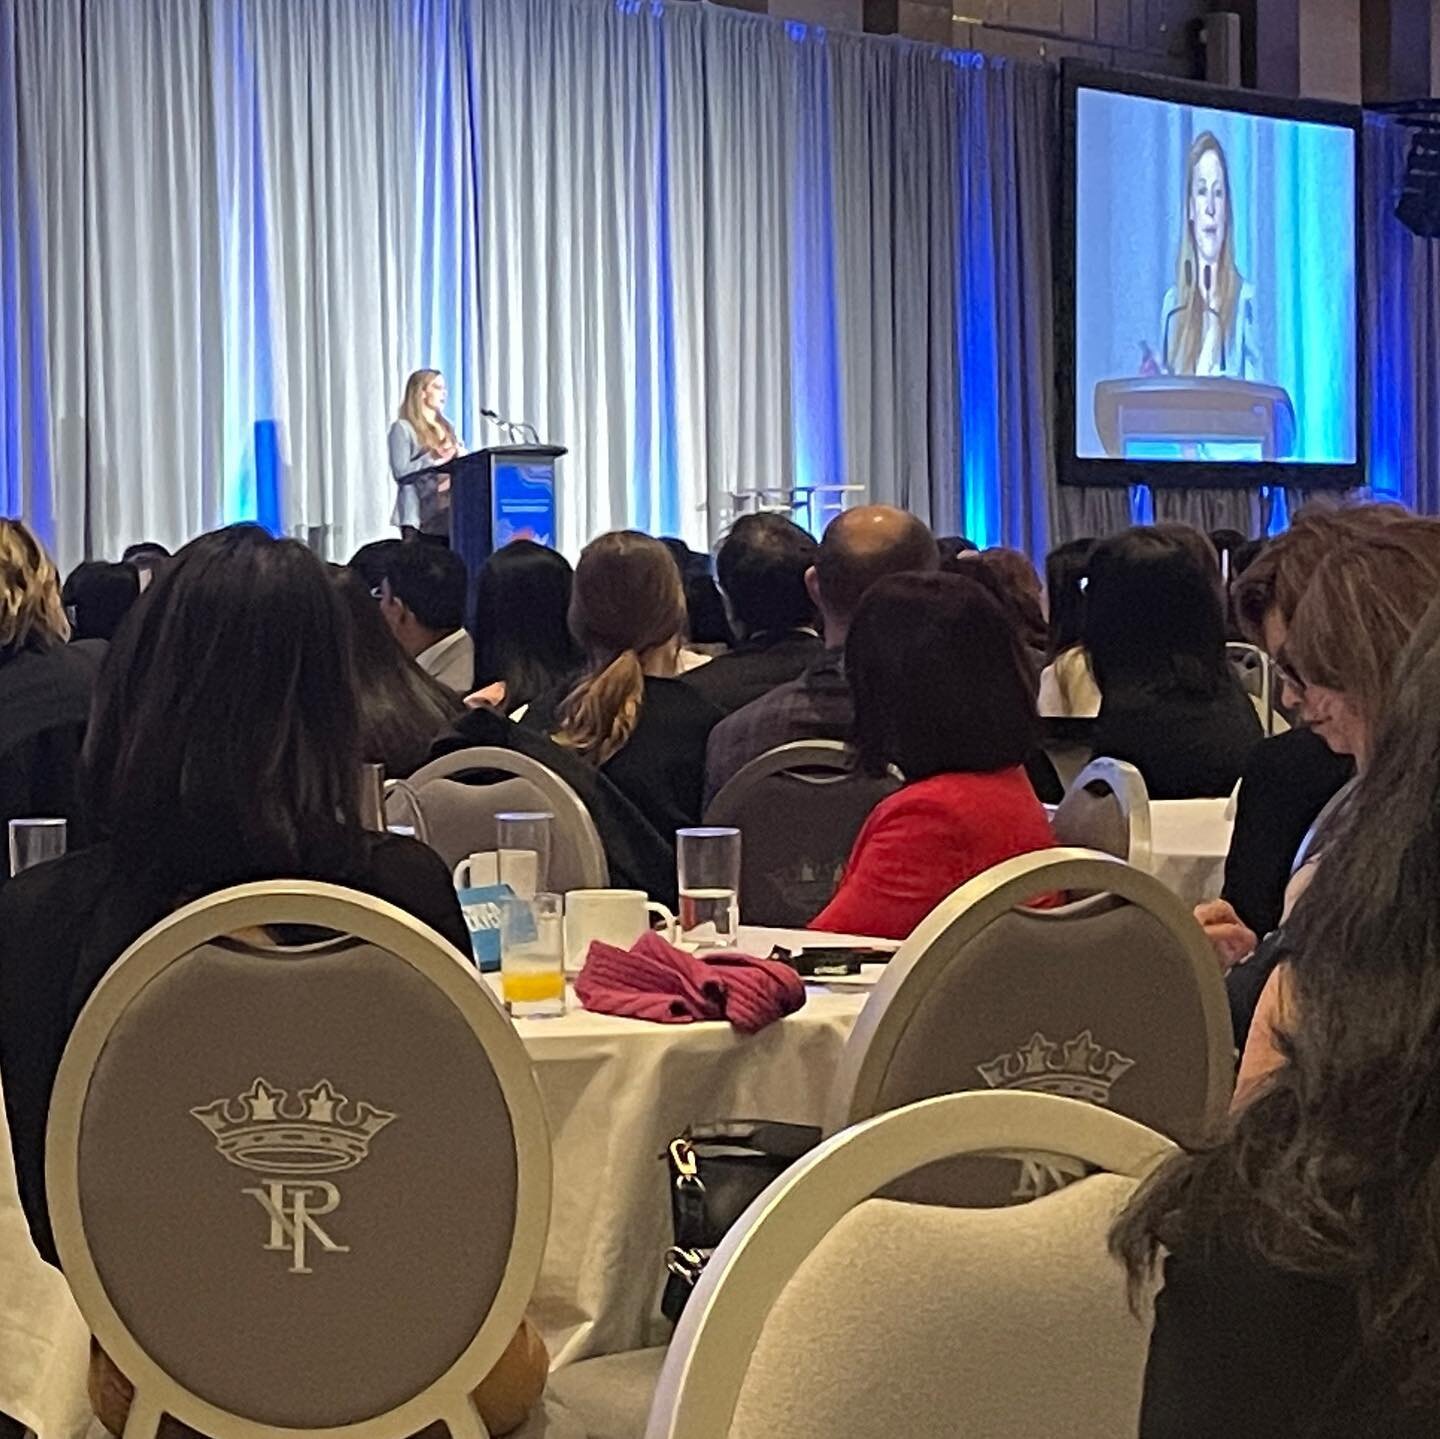 Happy International Women&rsquo;s Day! 

Thanks to KPMG for the invitation to attend their Network of Women&rsquo;s event where we had the privilege of sharing space with over 600 attendees from over 160 different organizations. It was an honour to h